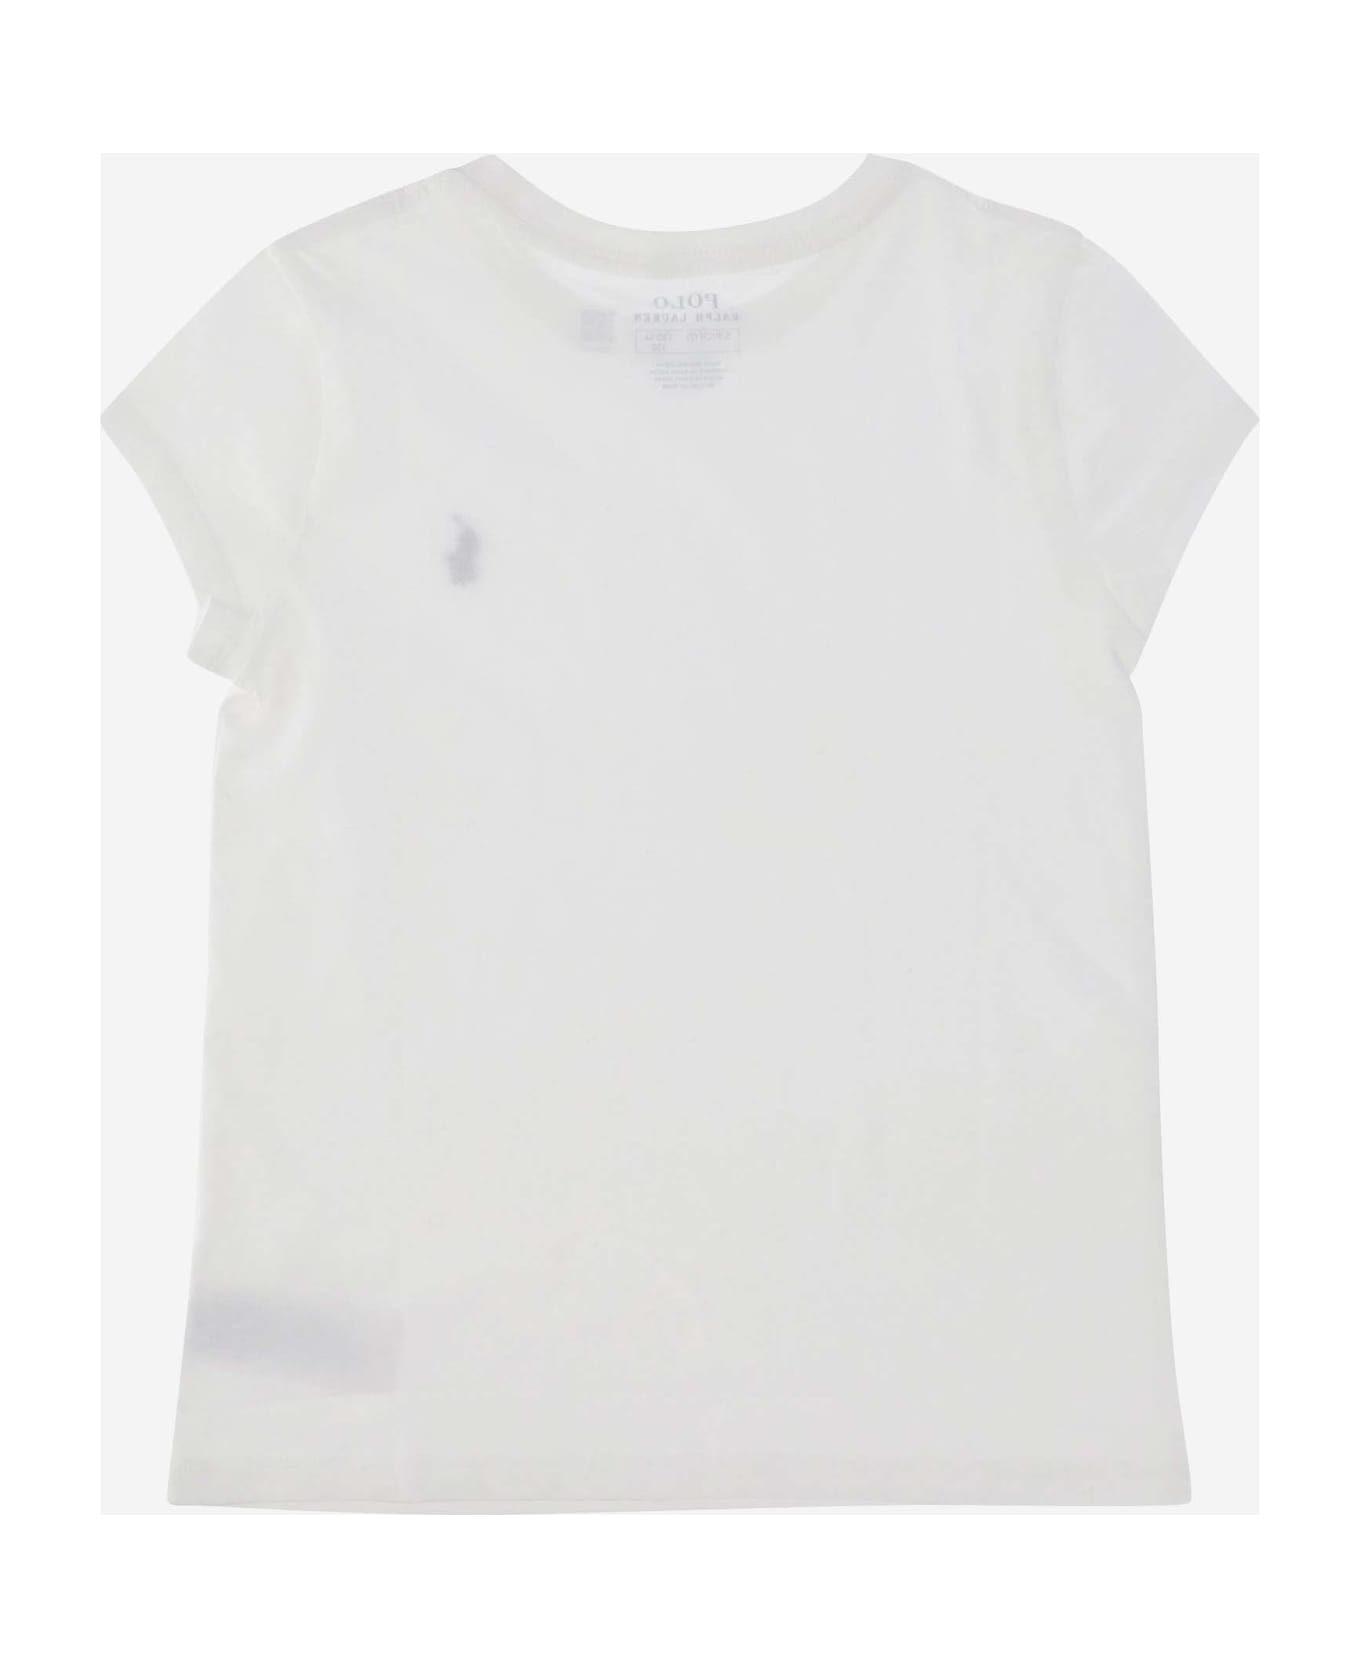 Polo Ralph Lauren Cotton T-shirt With Logo - White トップス